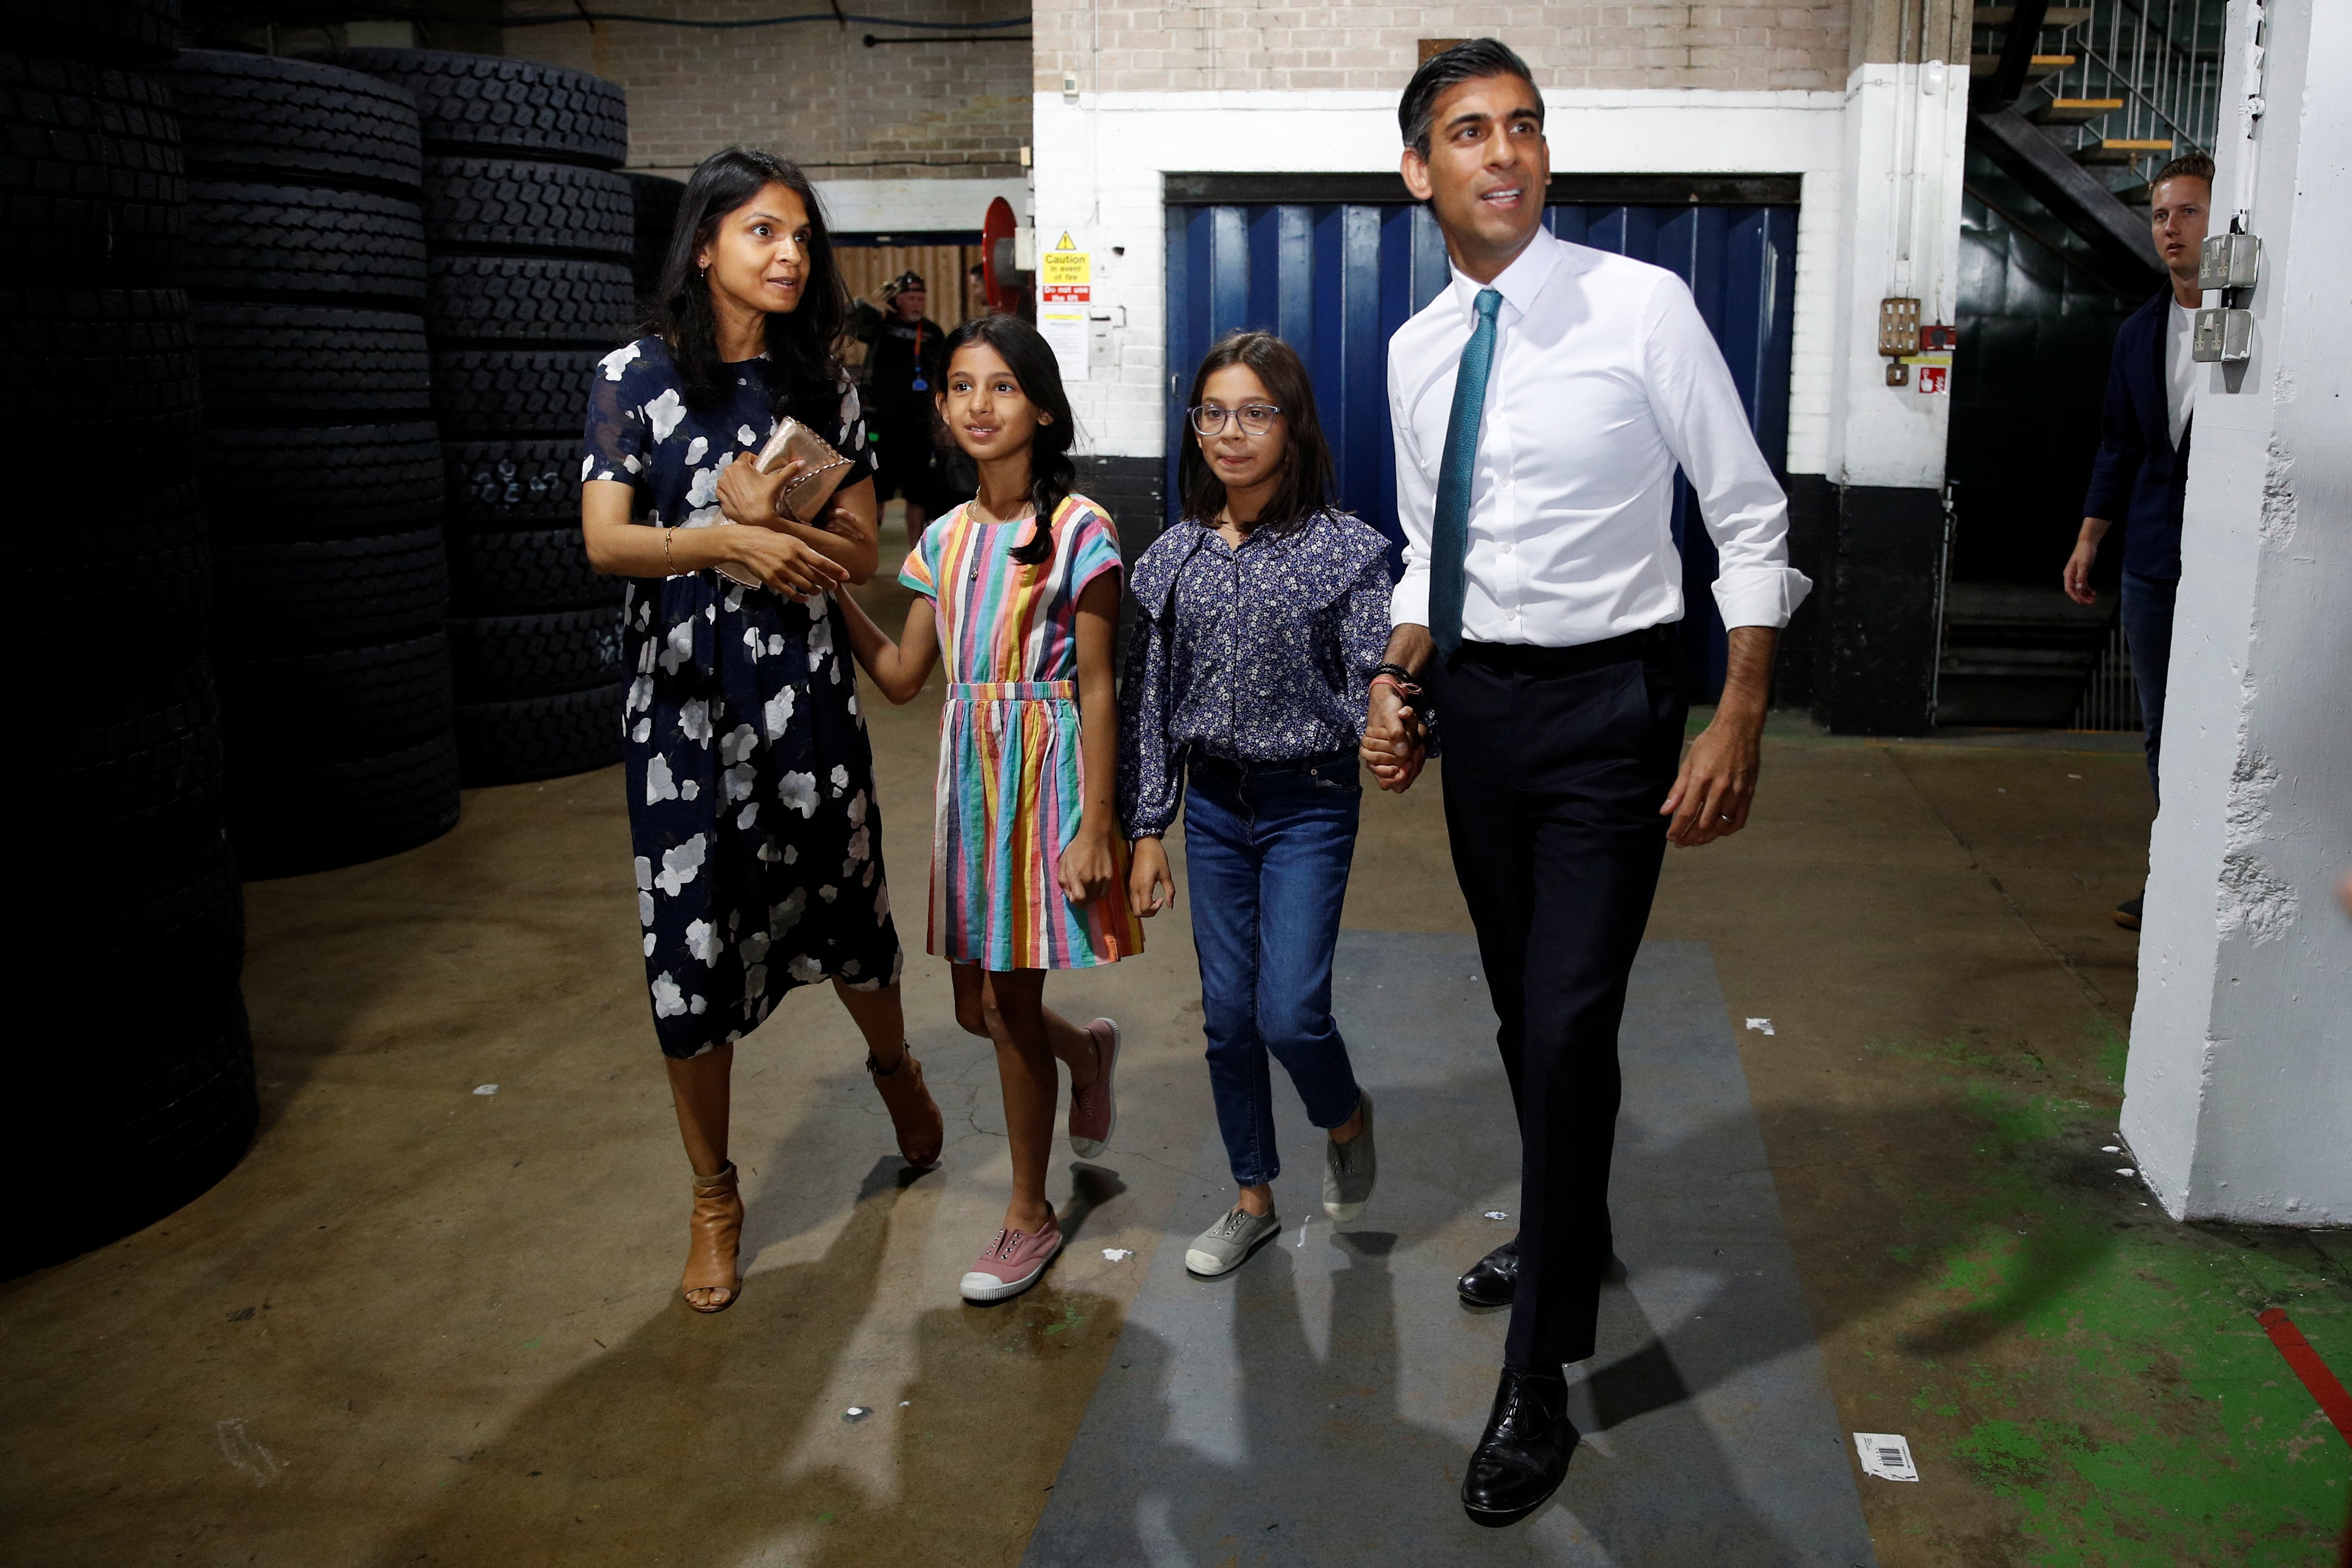 Rishi Sunak, his wife Akshata Murthy and their daughters Anoushka and Krishna attend a Conservative Party leadership campaign event in Grantham